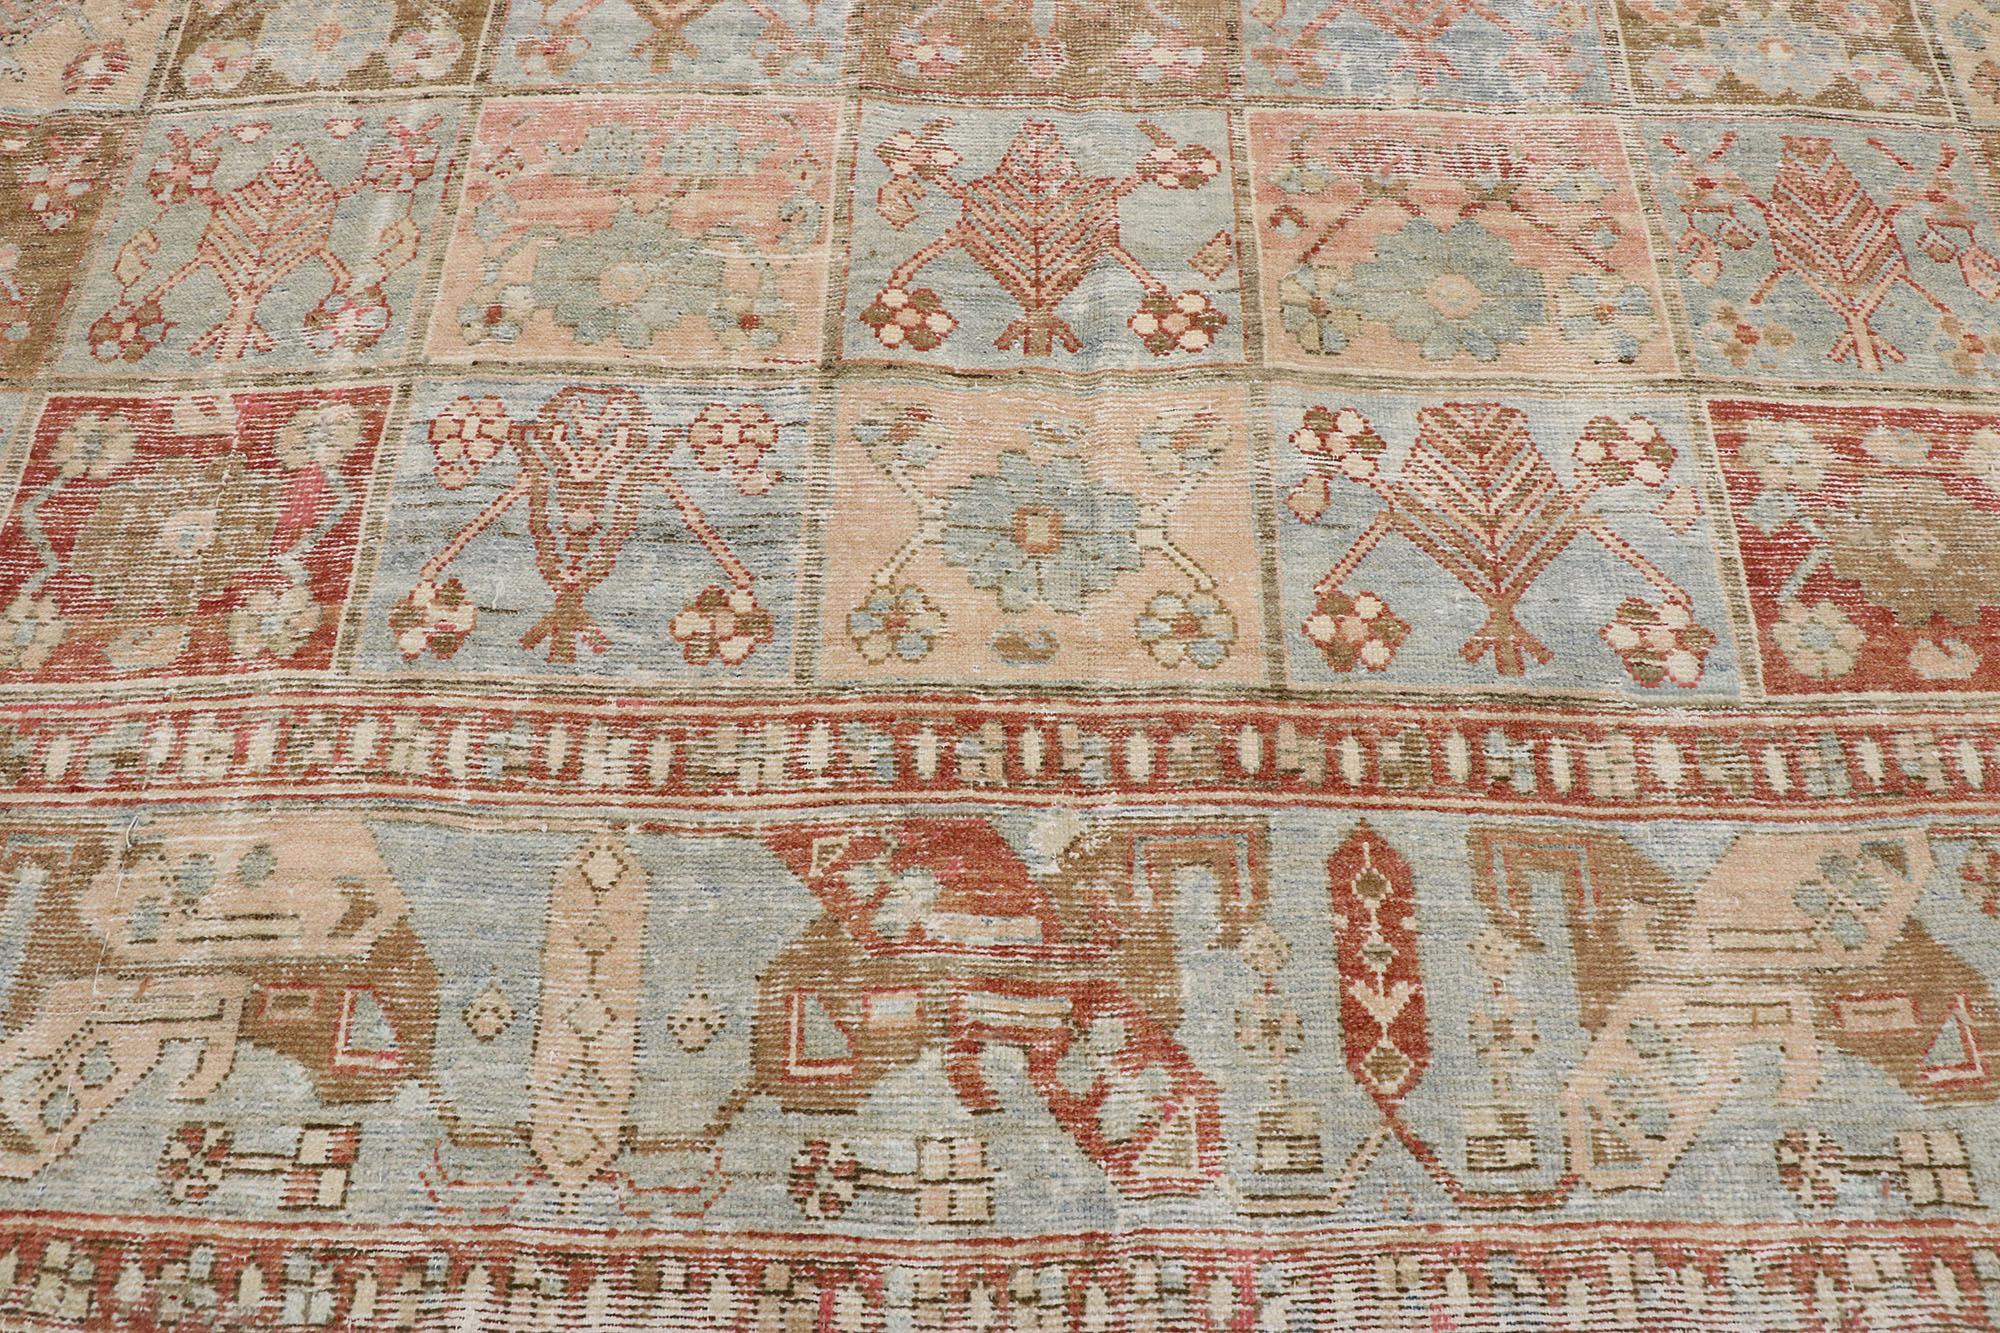 Hand-Knotted Distressed Antique Persian Bakhtiari Rug with Modern French Rustic Style